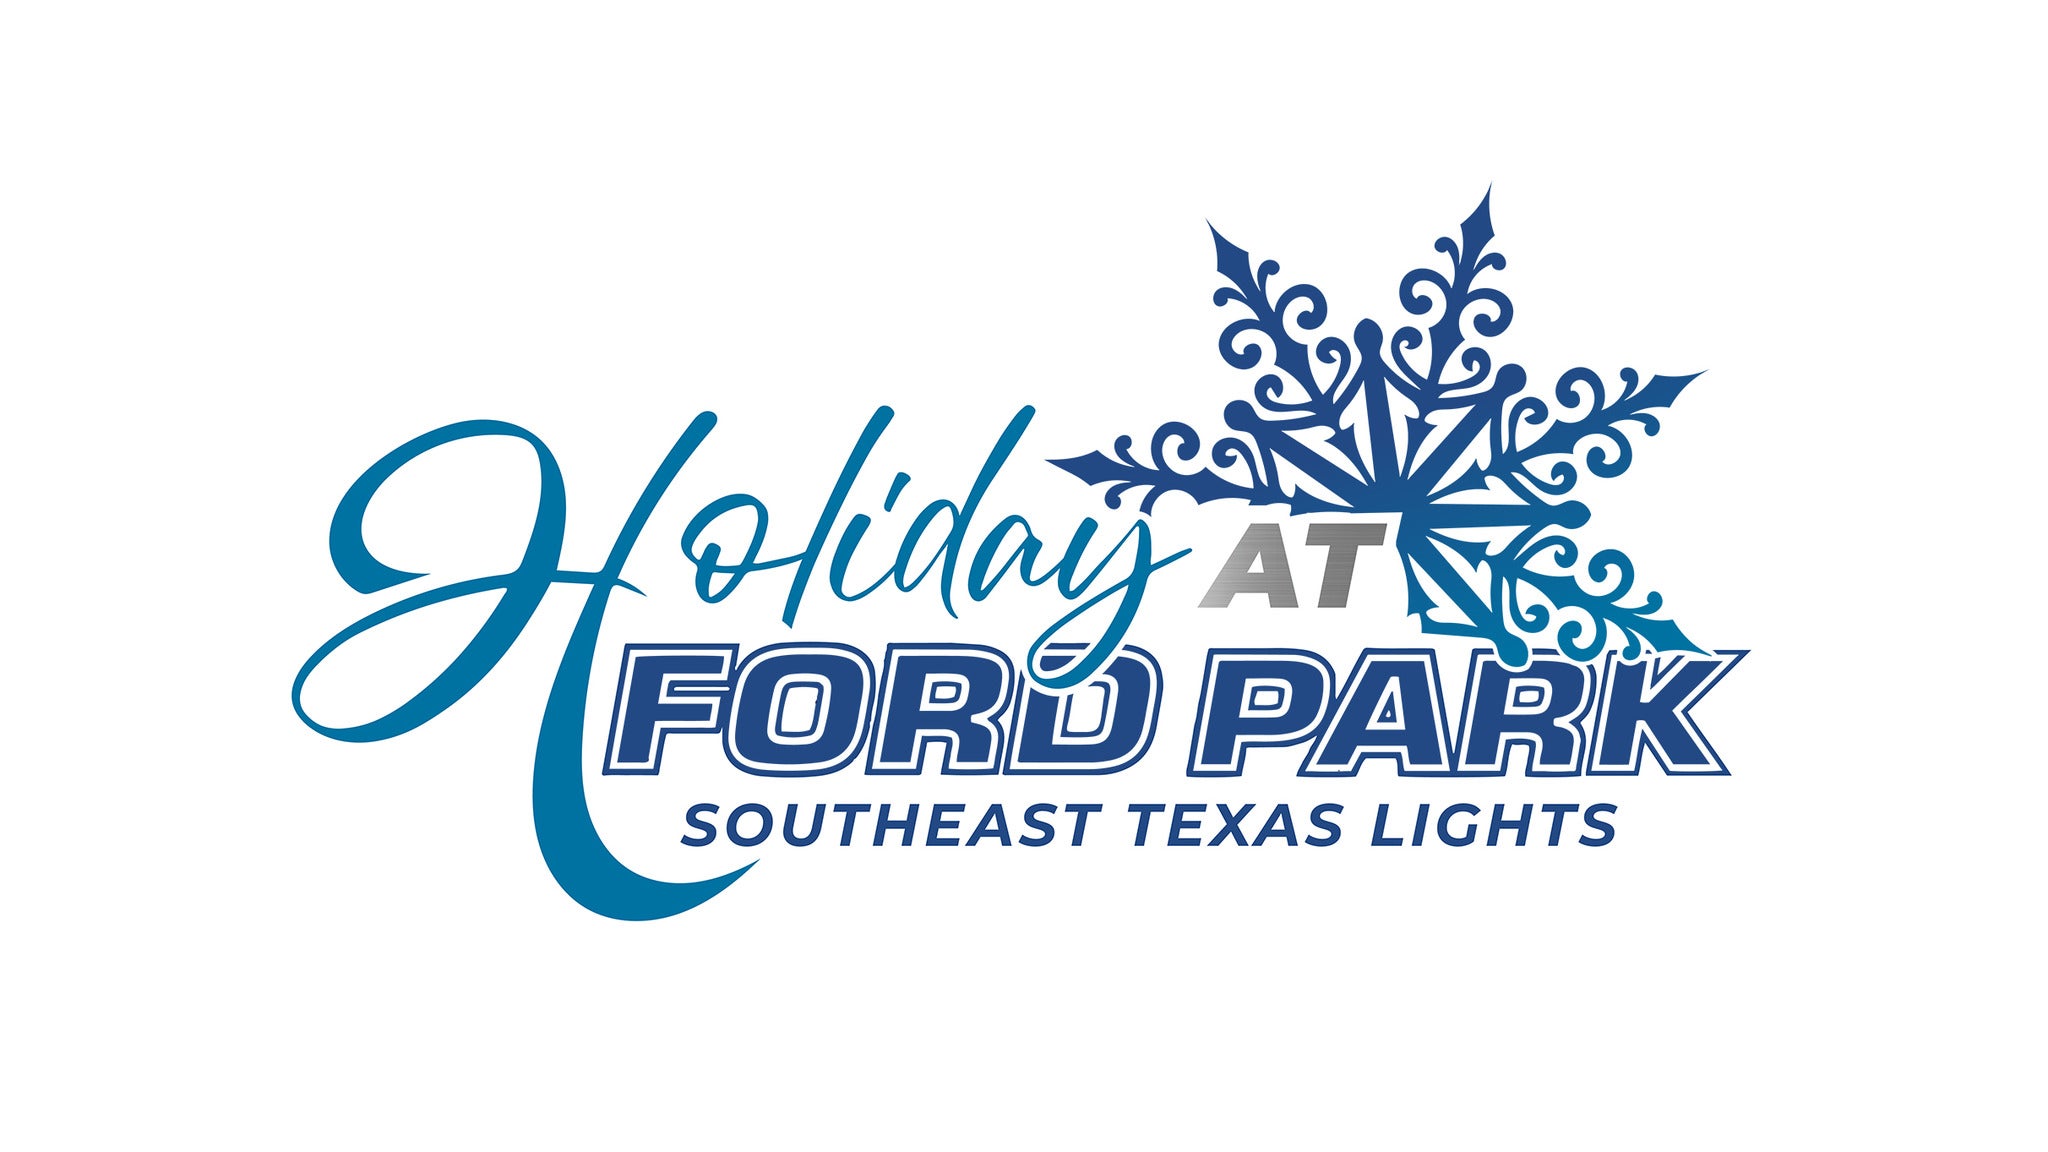 Holiday at Ford Park - Southeast Texas Lights in Beaumont promo photo for Cyber Monday Sale presale offer code